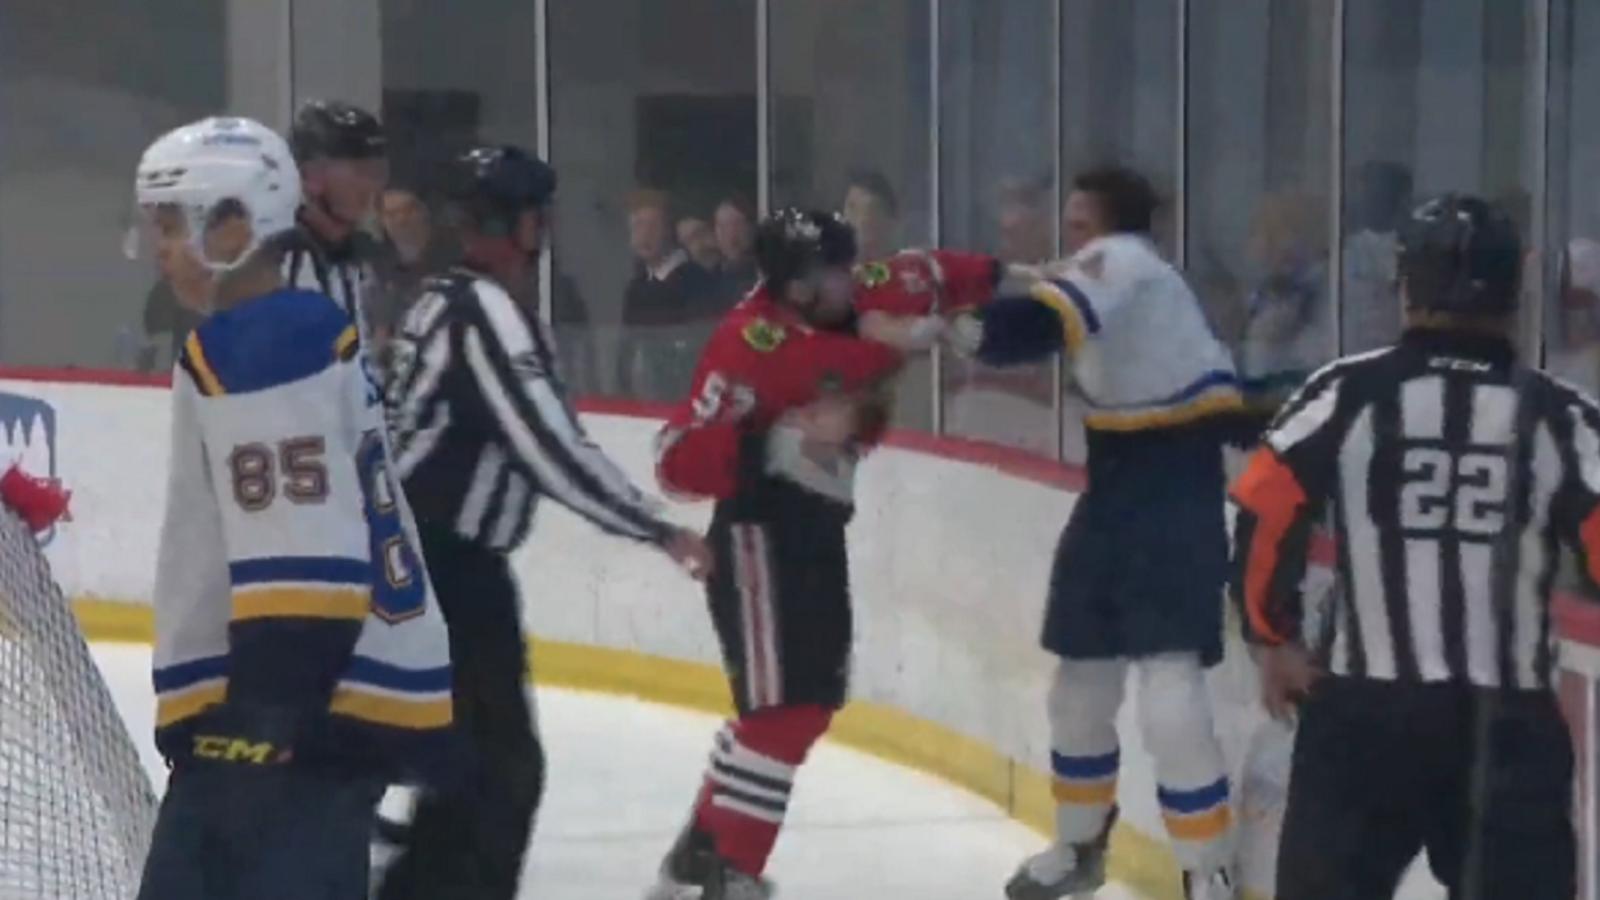 Blackhawks vs Blues turns ugly in the first period.